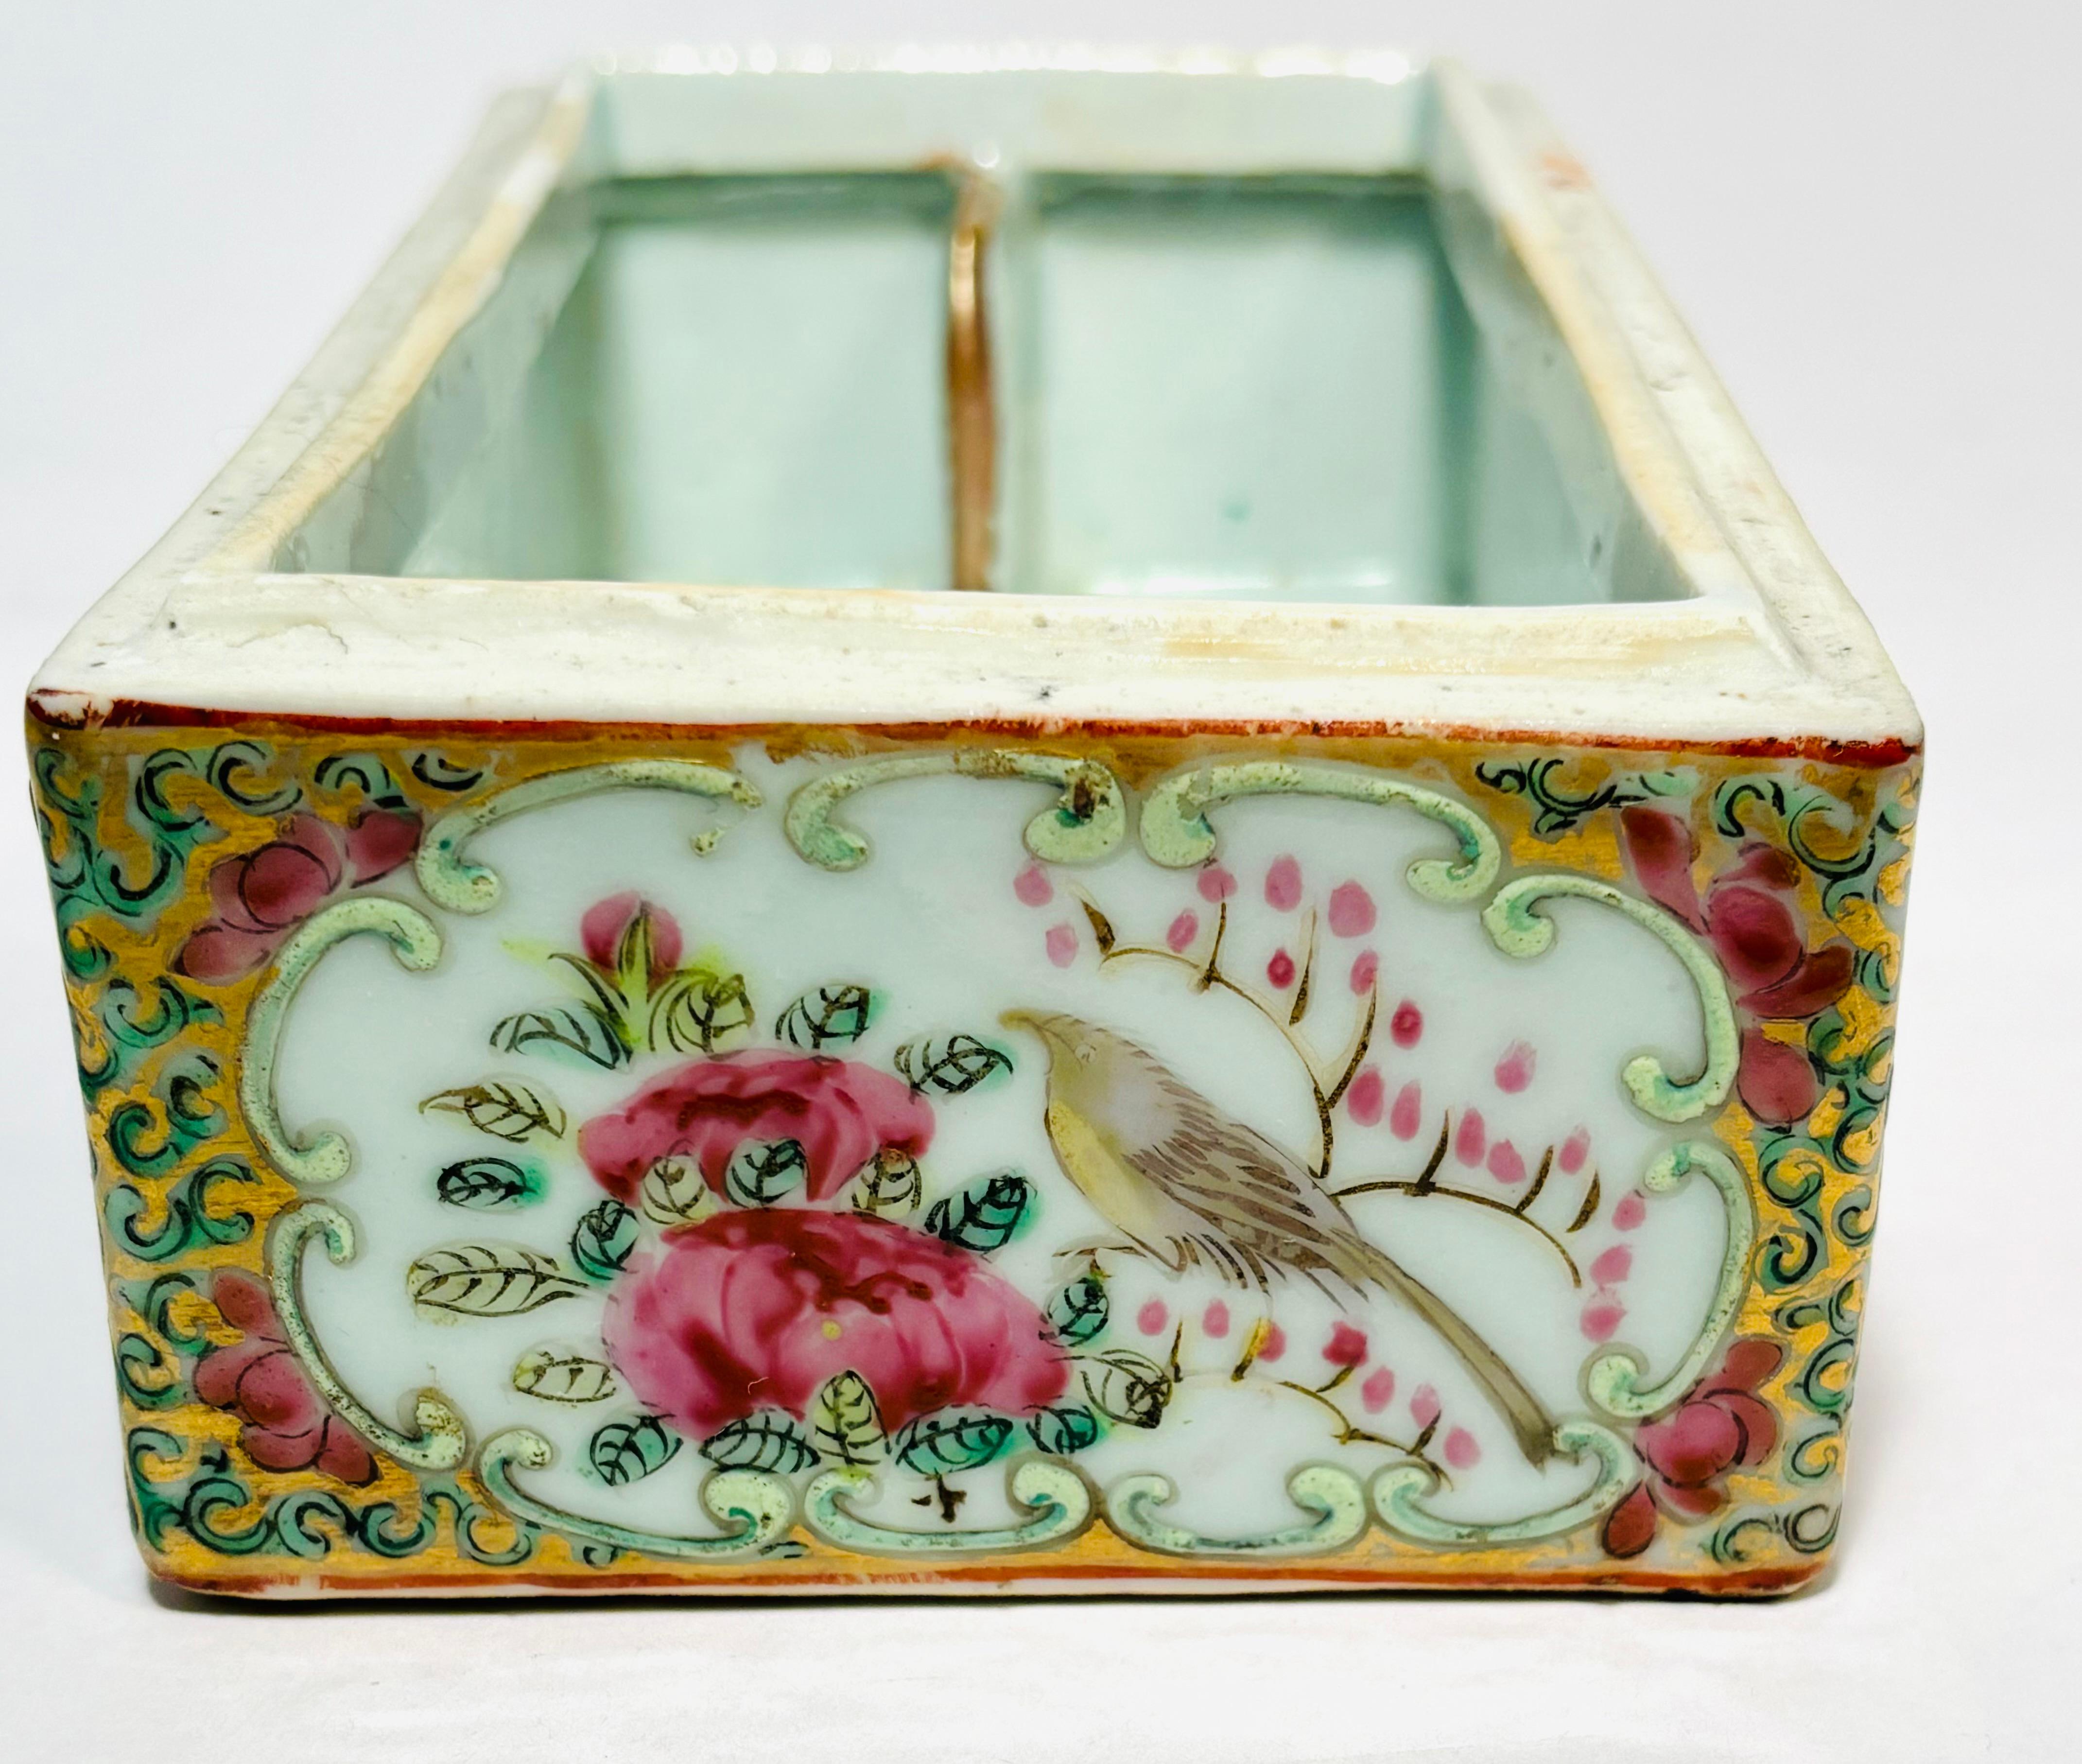 Antique Chinese Famille Rose Porcelain Box or Desk Accessory In Good Condition For Sale In West Palm Beach, FL